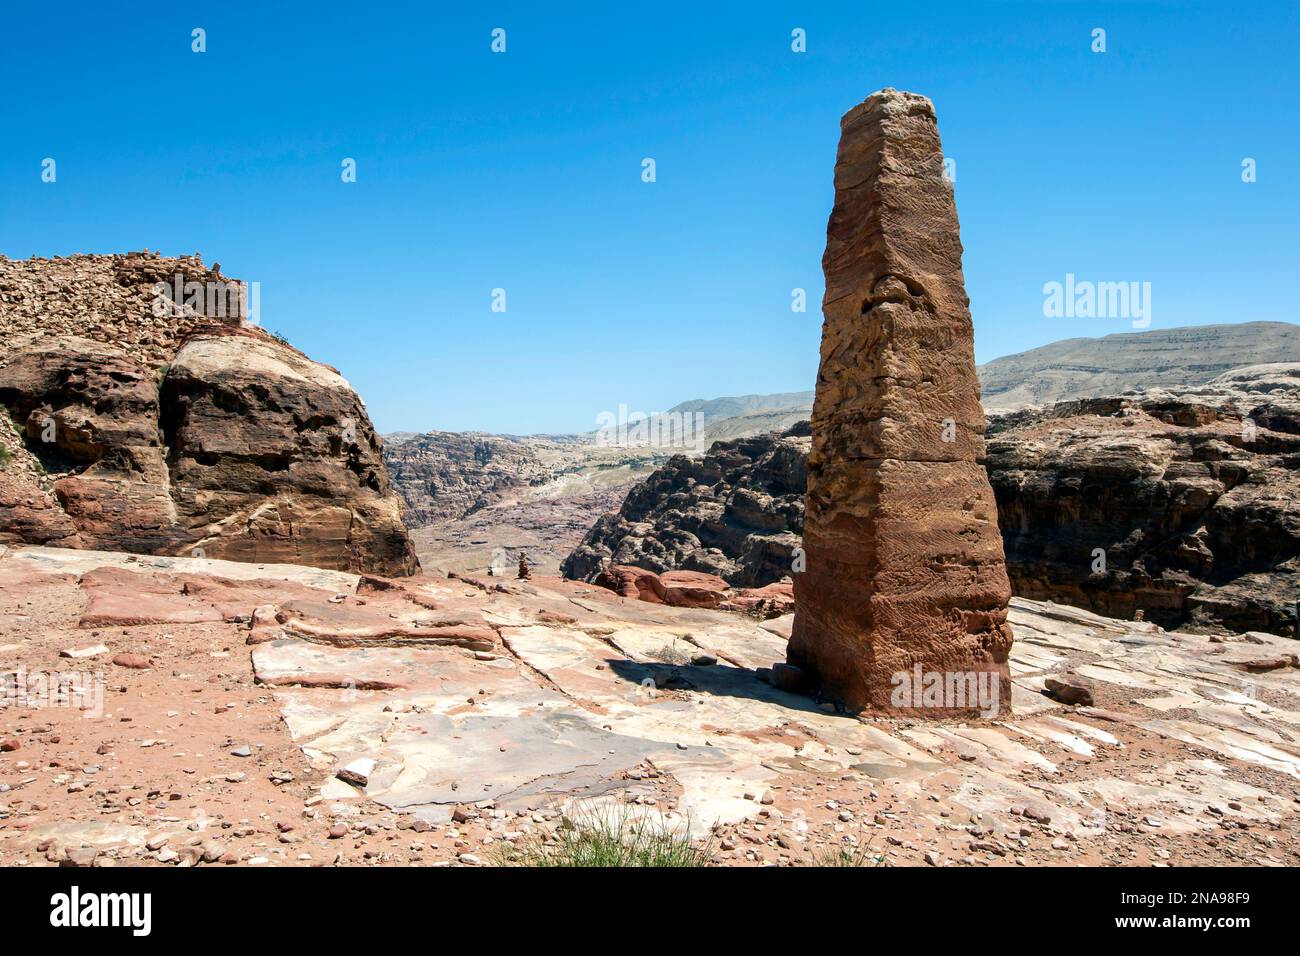 One of the two obelisks marking the entrance to the High Place of Sacrifice at the ancient site of Petra in Jordan. Stock Photo